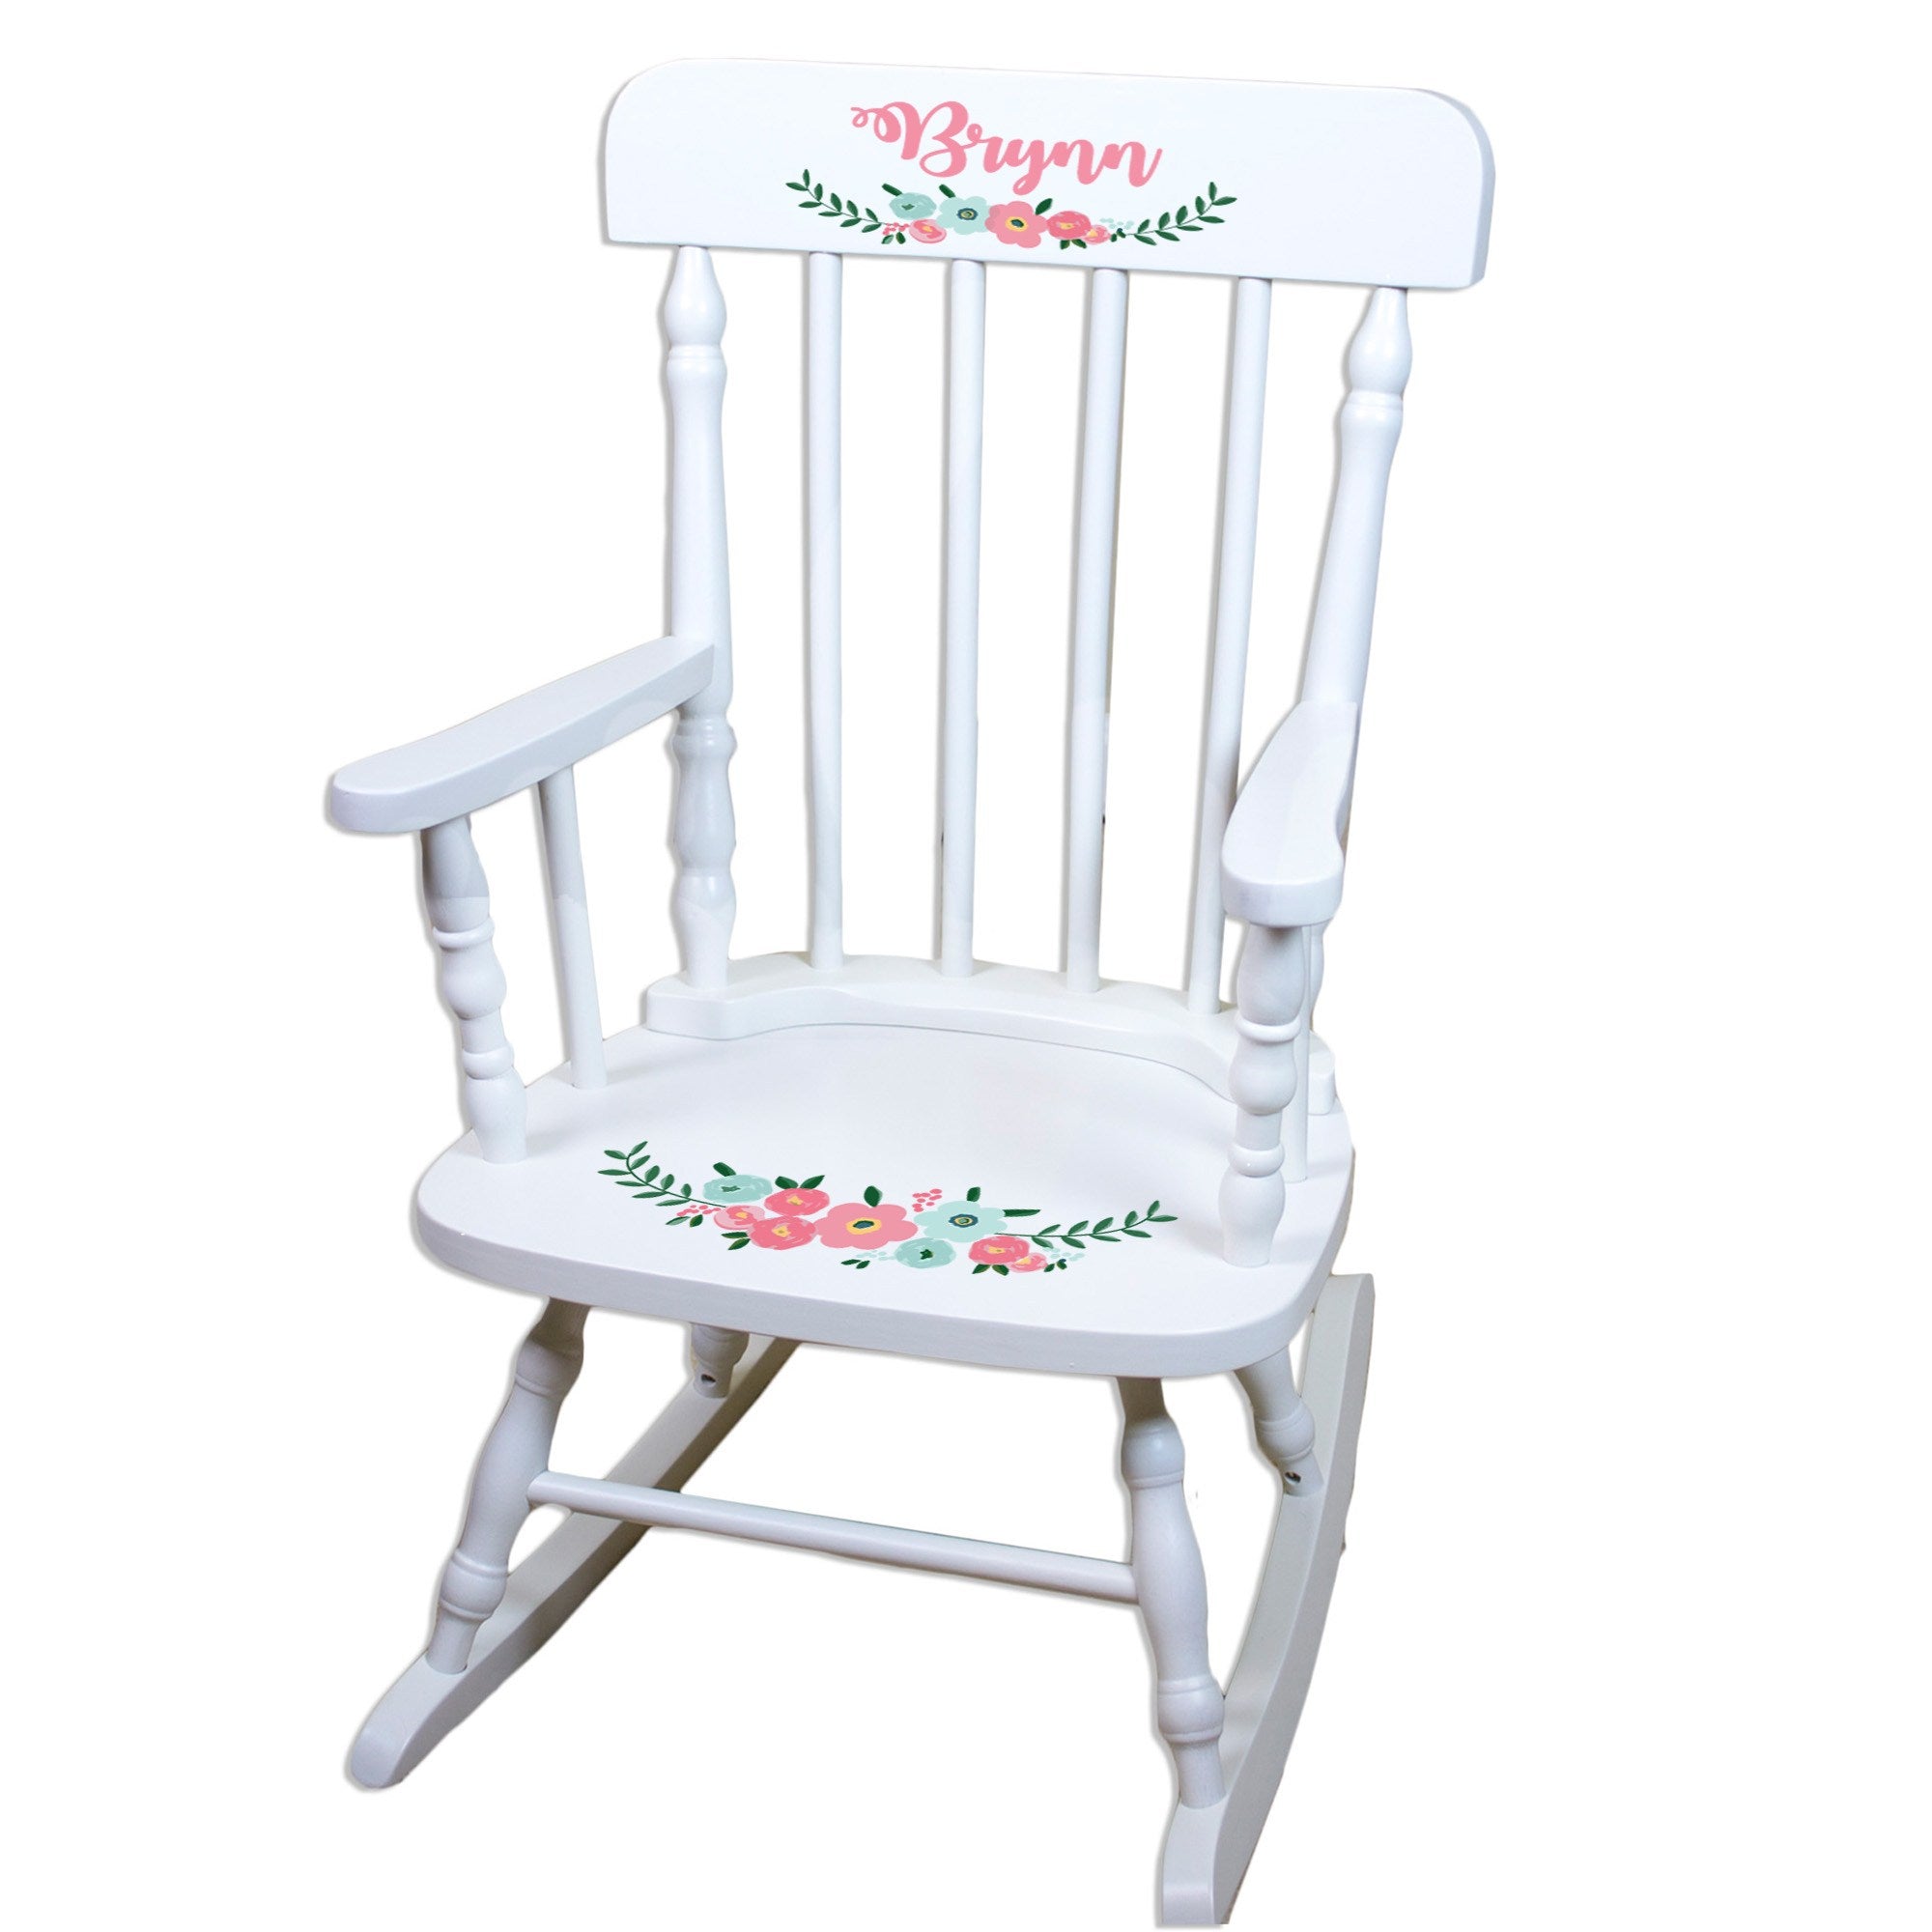 personalized children's rocking chair for girl